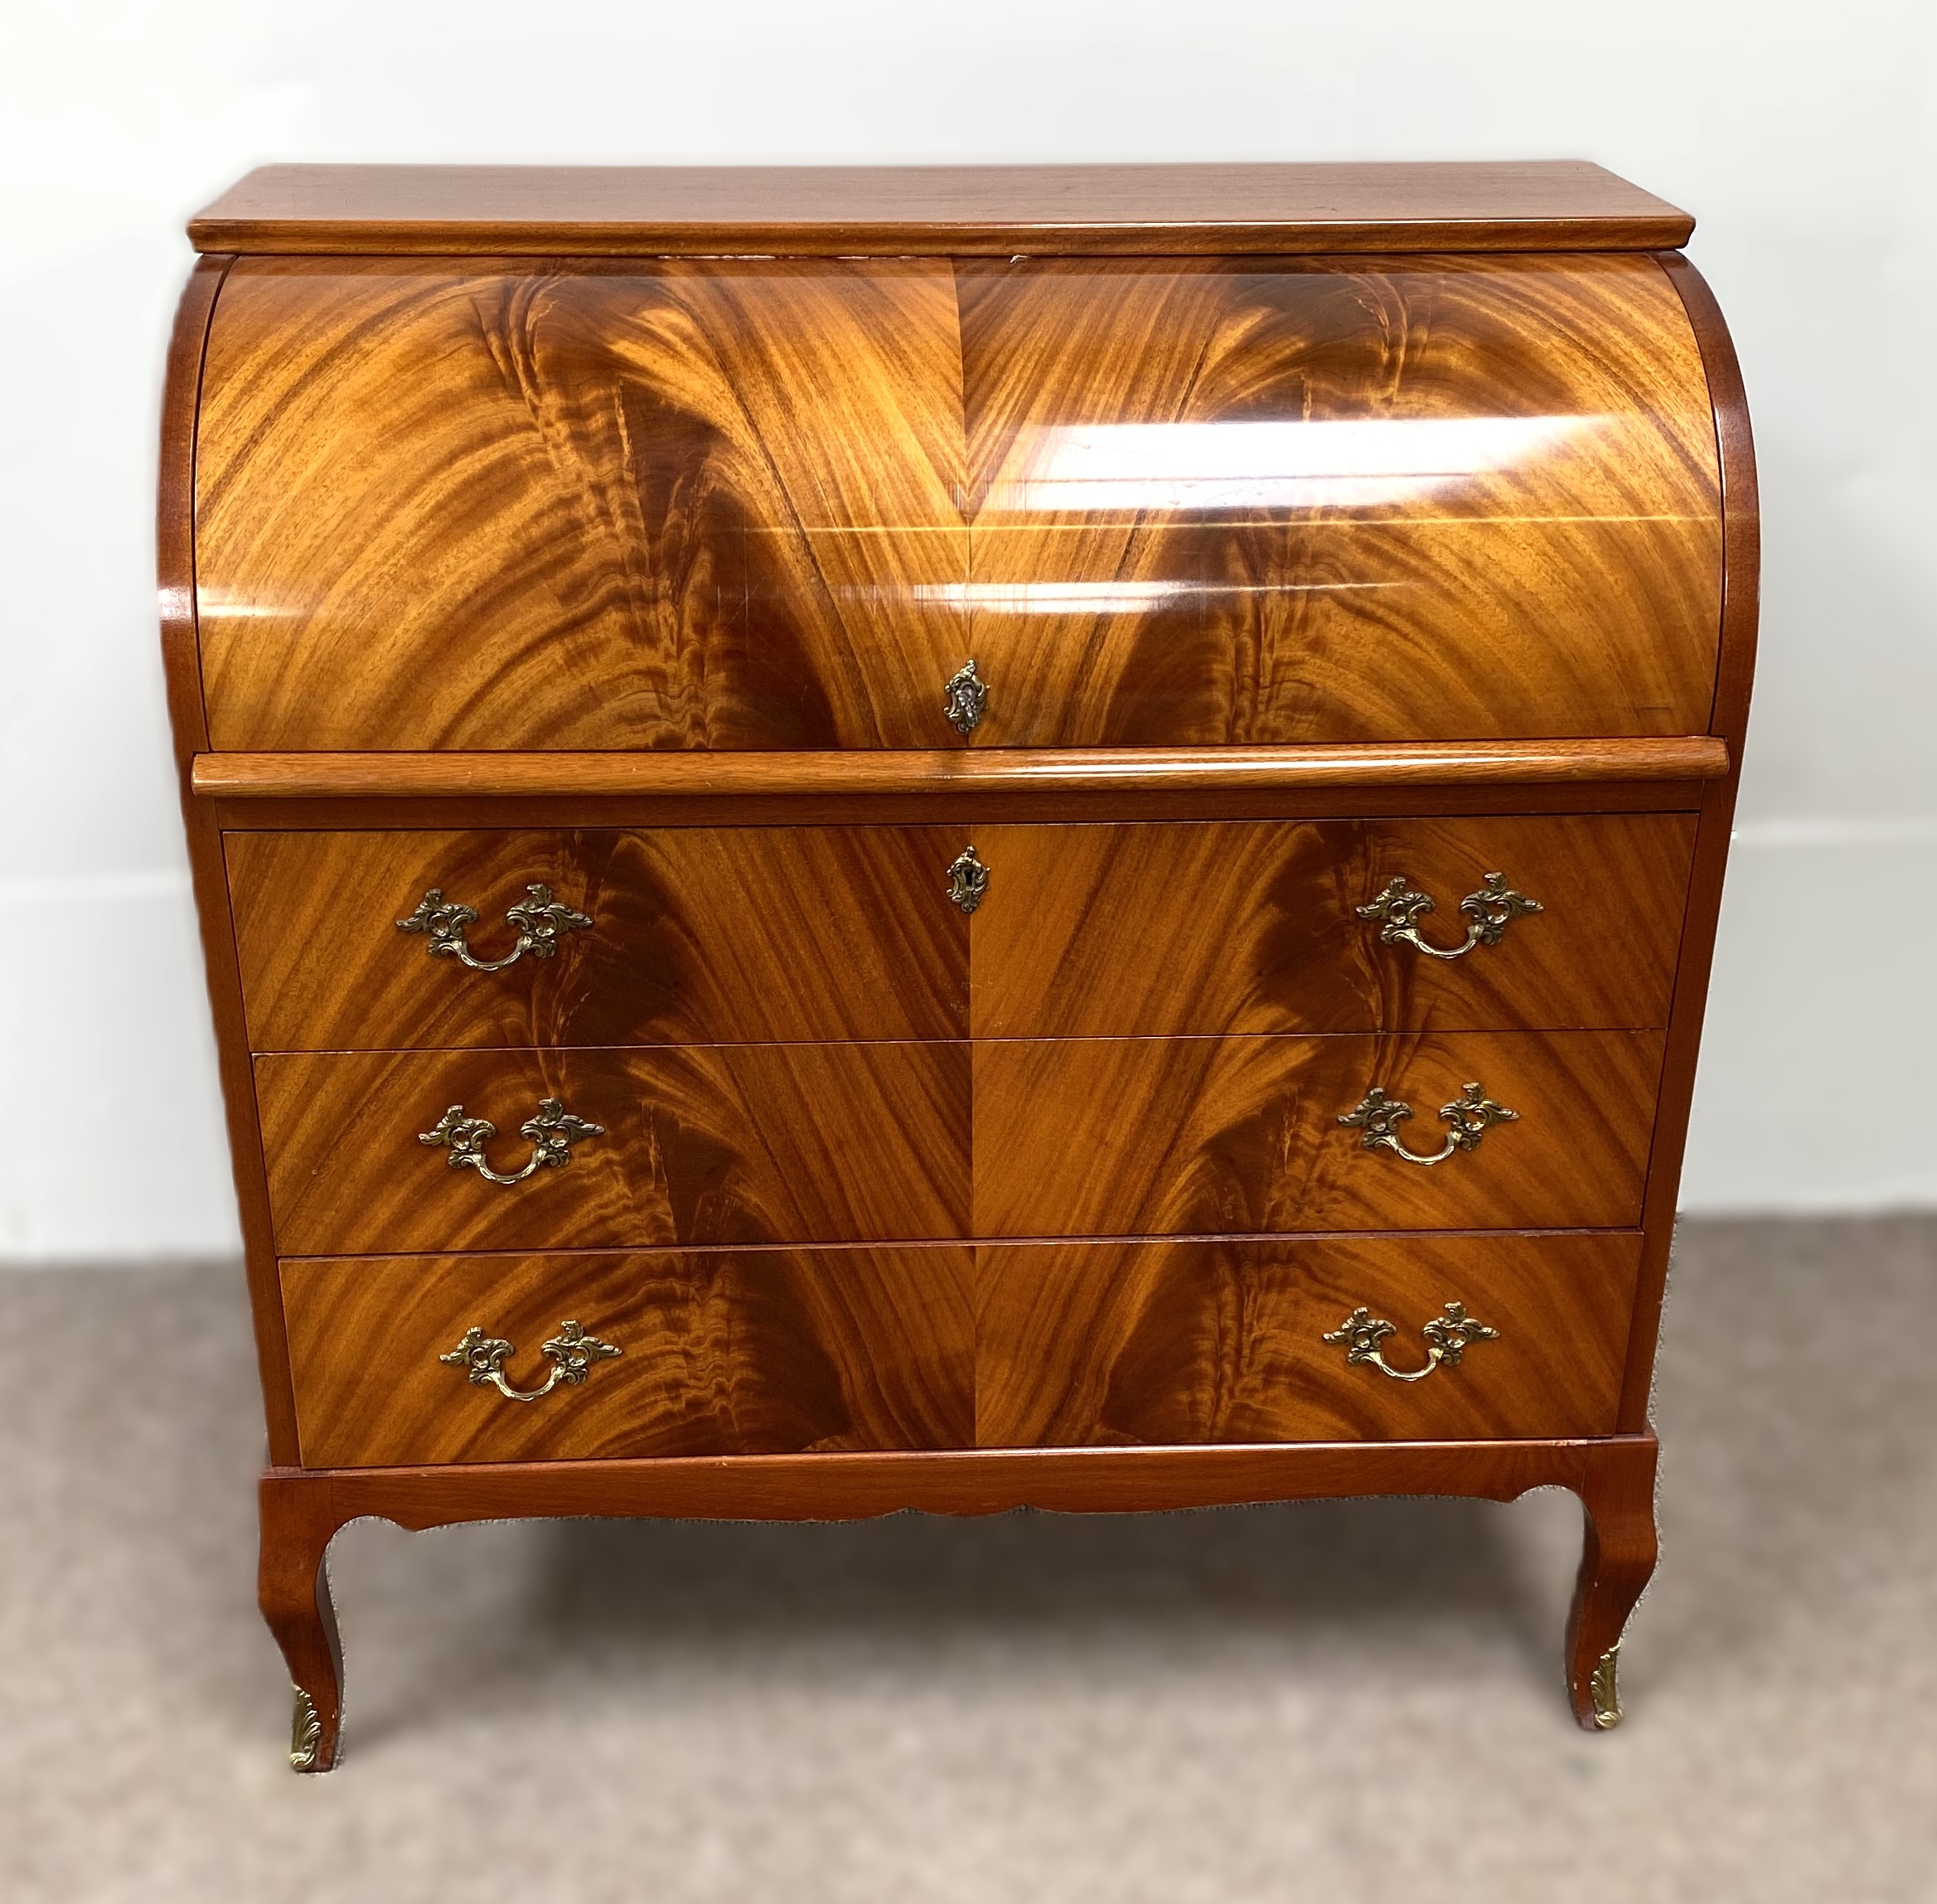 A modern reproduction mahogany veneered cylinder bureau, with roll top and arrangement of niches and